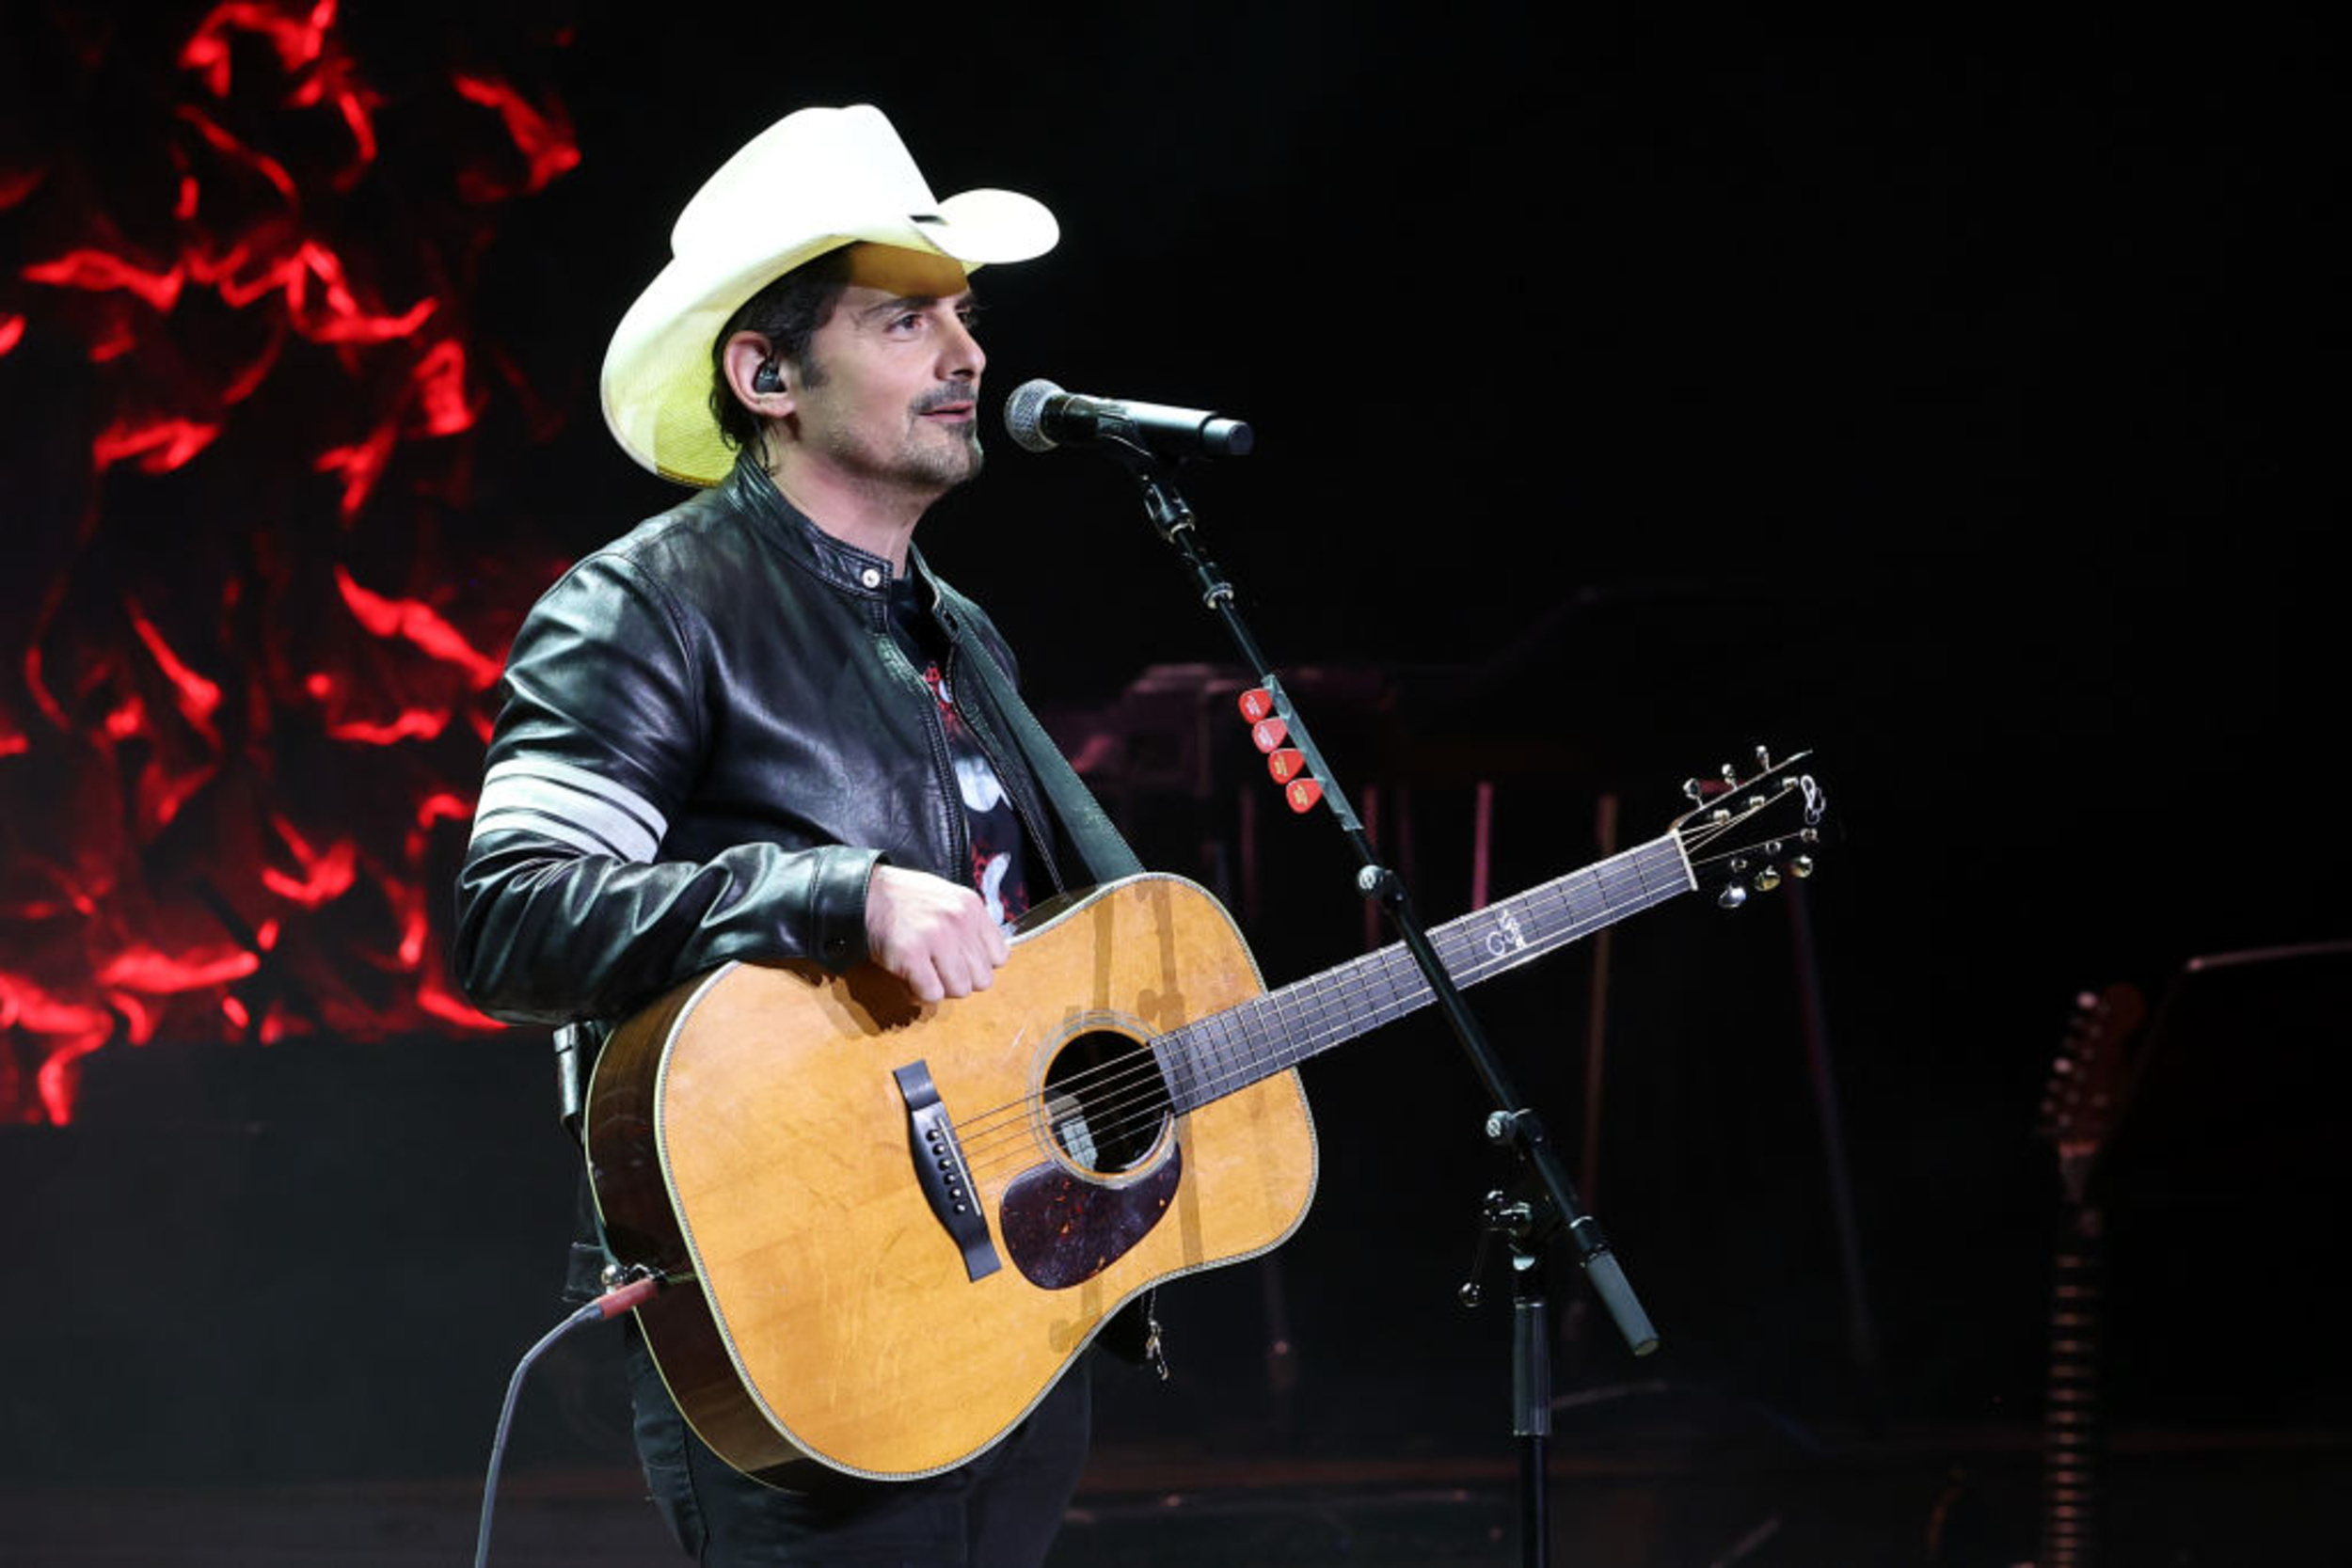 <p>Some teenagers have dreams of becoming professional athletes, movie stars, or attending a certain college. However, for Brad Paisley, his dream as a teenager was getting the car he wanted, as he iterates in his song <a href="https://www.youtube.com/watch?v=fYZpcMvDEac" rel="noopener noreferrer">“All I Wanted Was a Car.”</a> He sings about saving up as much money as possible, and once he got the car, he drove it everywhere. </p><p><a href='https://www.msn.com/en-us/community/channel/vid-cj9pqbr0vn9in2b6ddcd8sfgpfq6x6utp44fssrv6mc2gtybw0us'>Did you enjoy this slideshow? Follow us on MSN to see more of our exclusive entertainment content.</a></p>